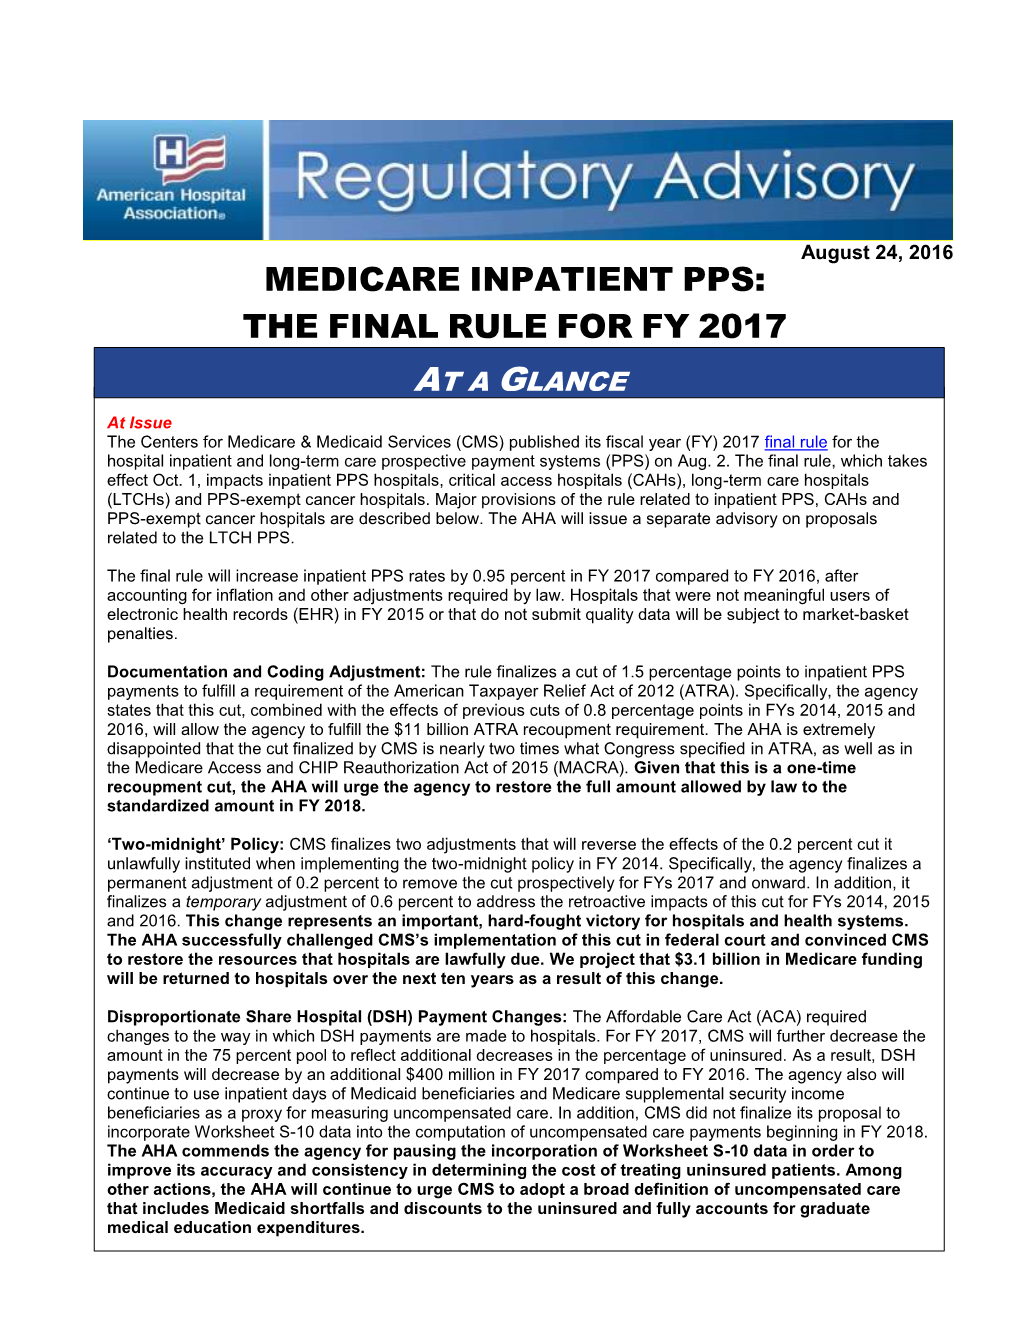 Medicare Inpatient Pps: the Final Rule for Fy 2017